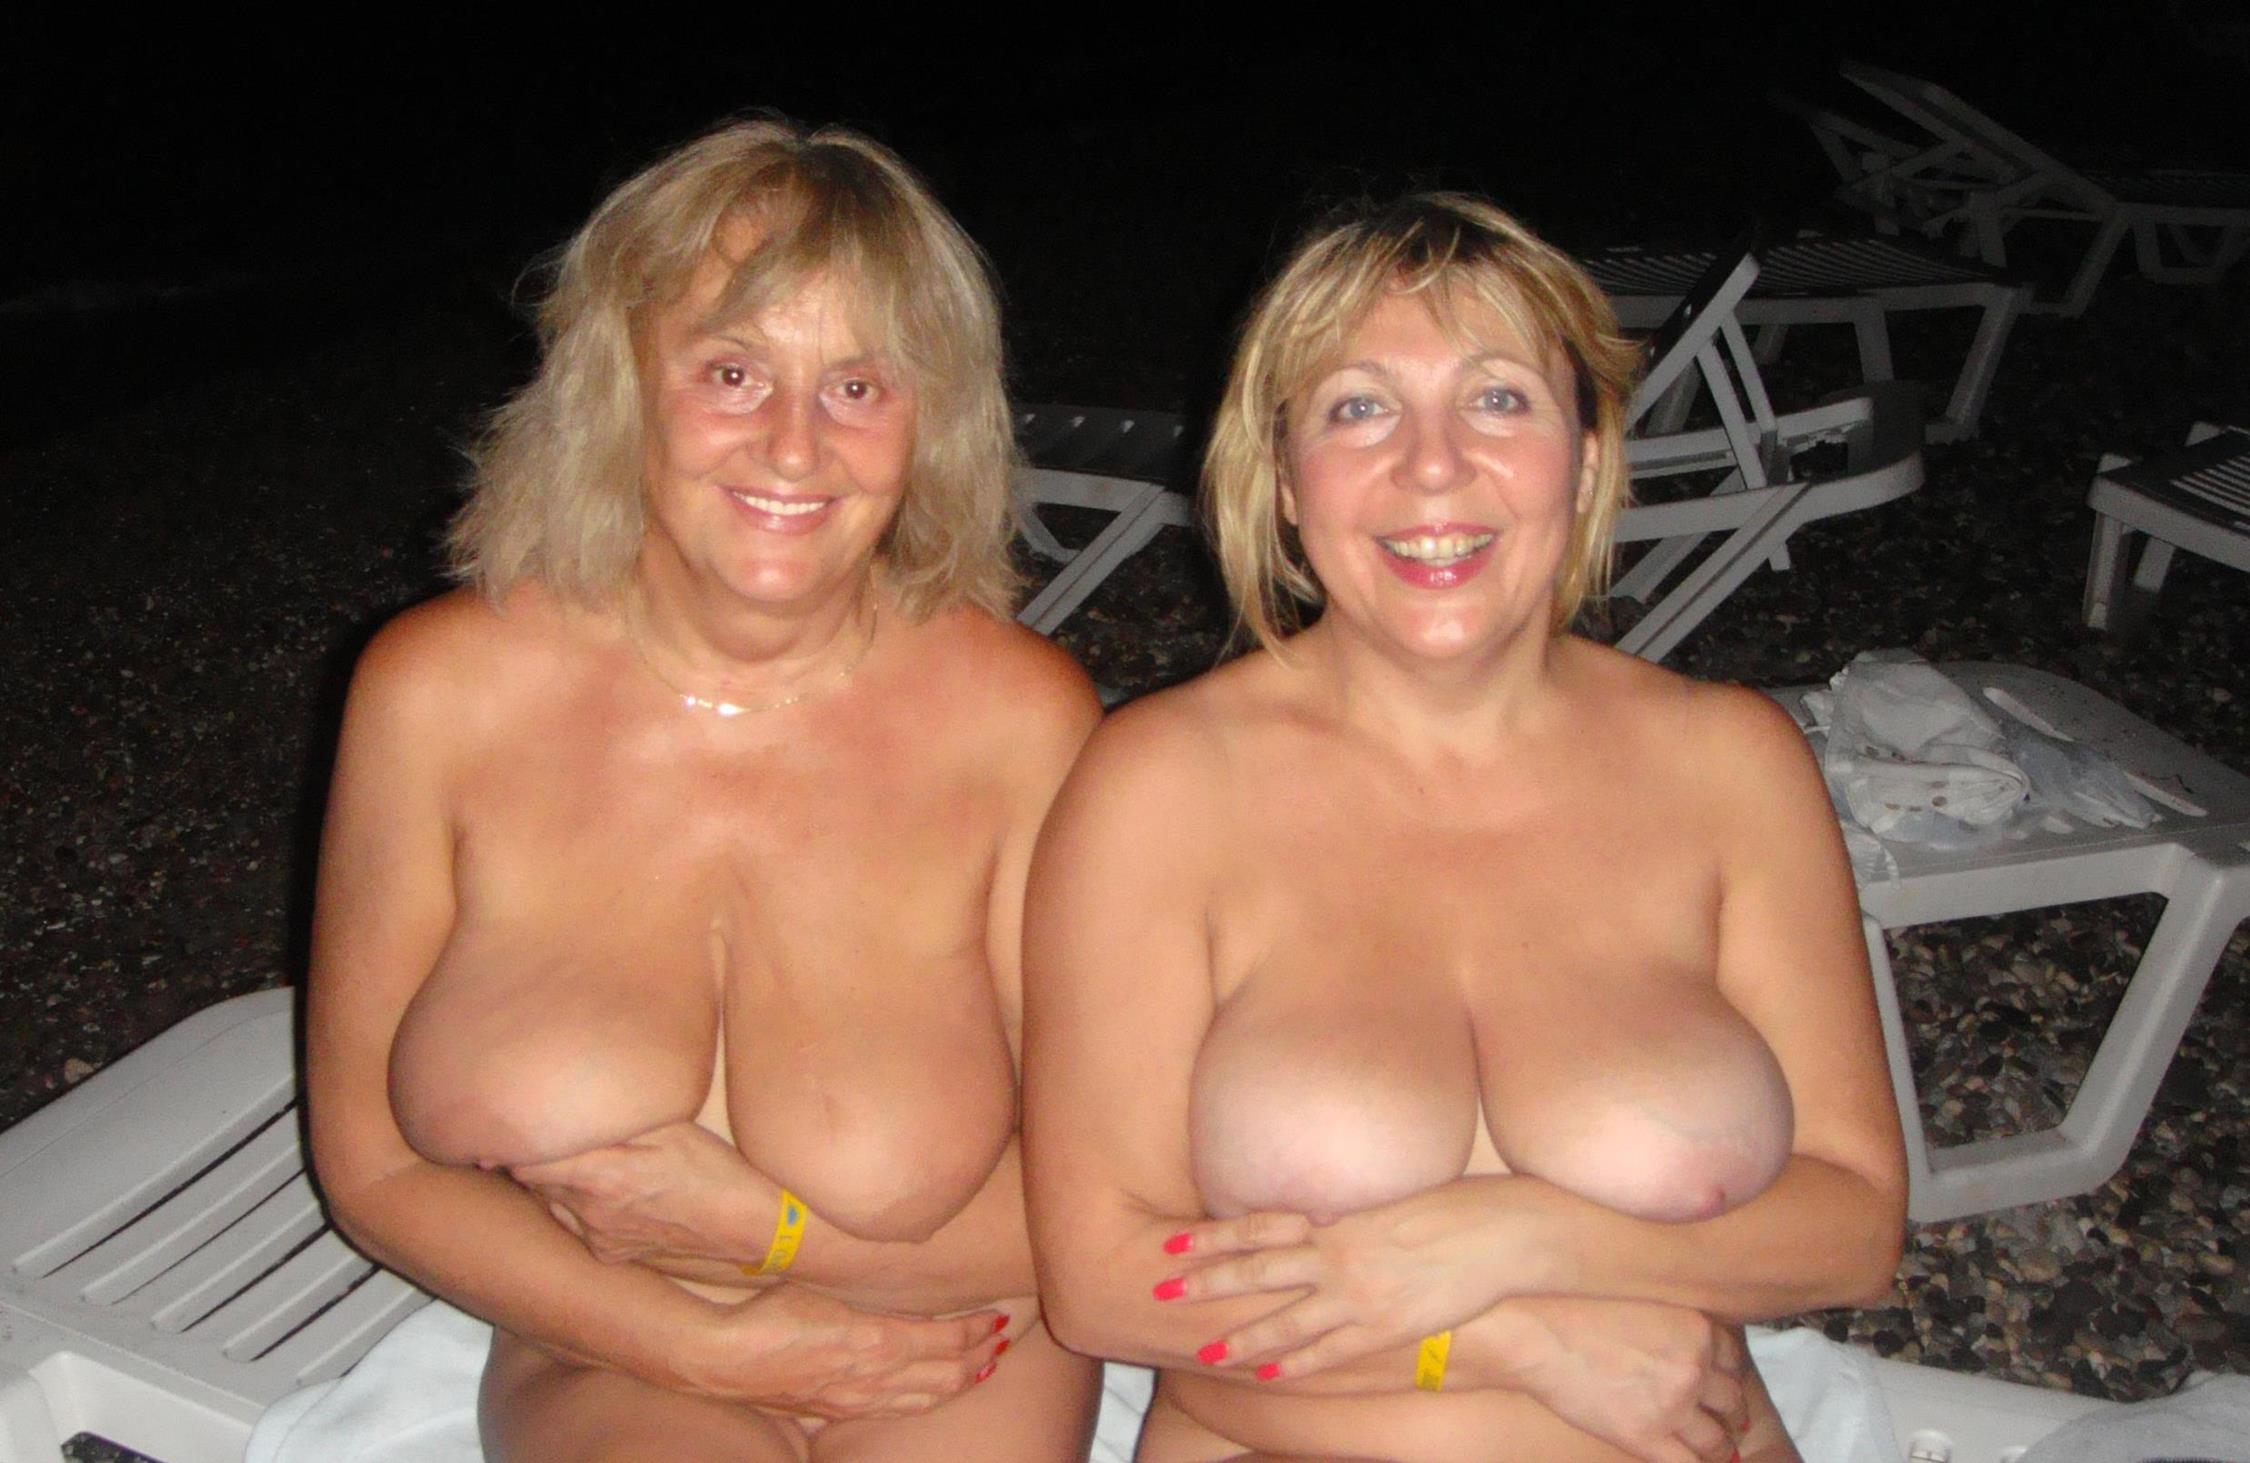 Mature huge juggs are waiting for you! Beautiful two gilfs show off gorgeous nude natural tits while sitting on a sun lounge